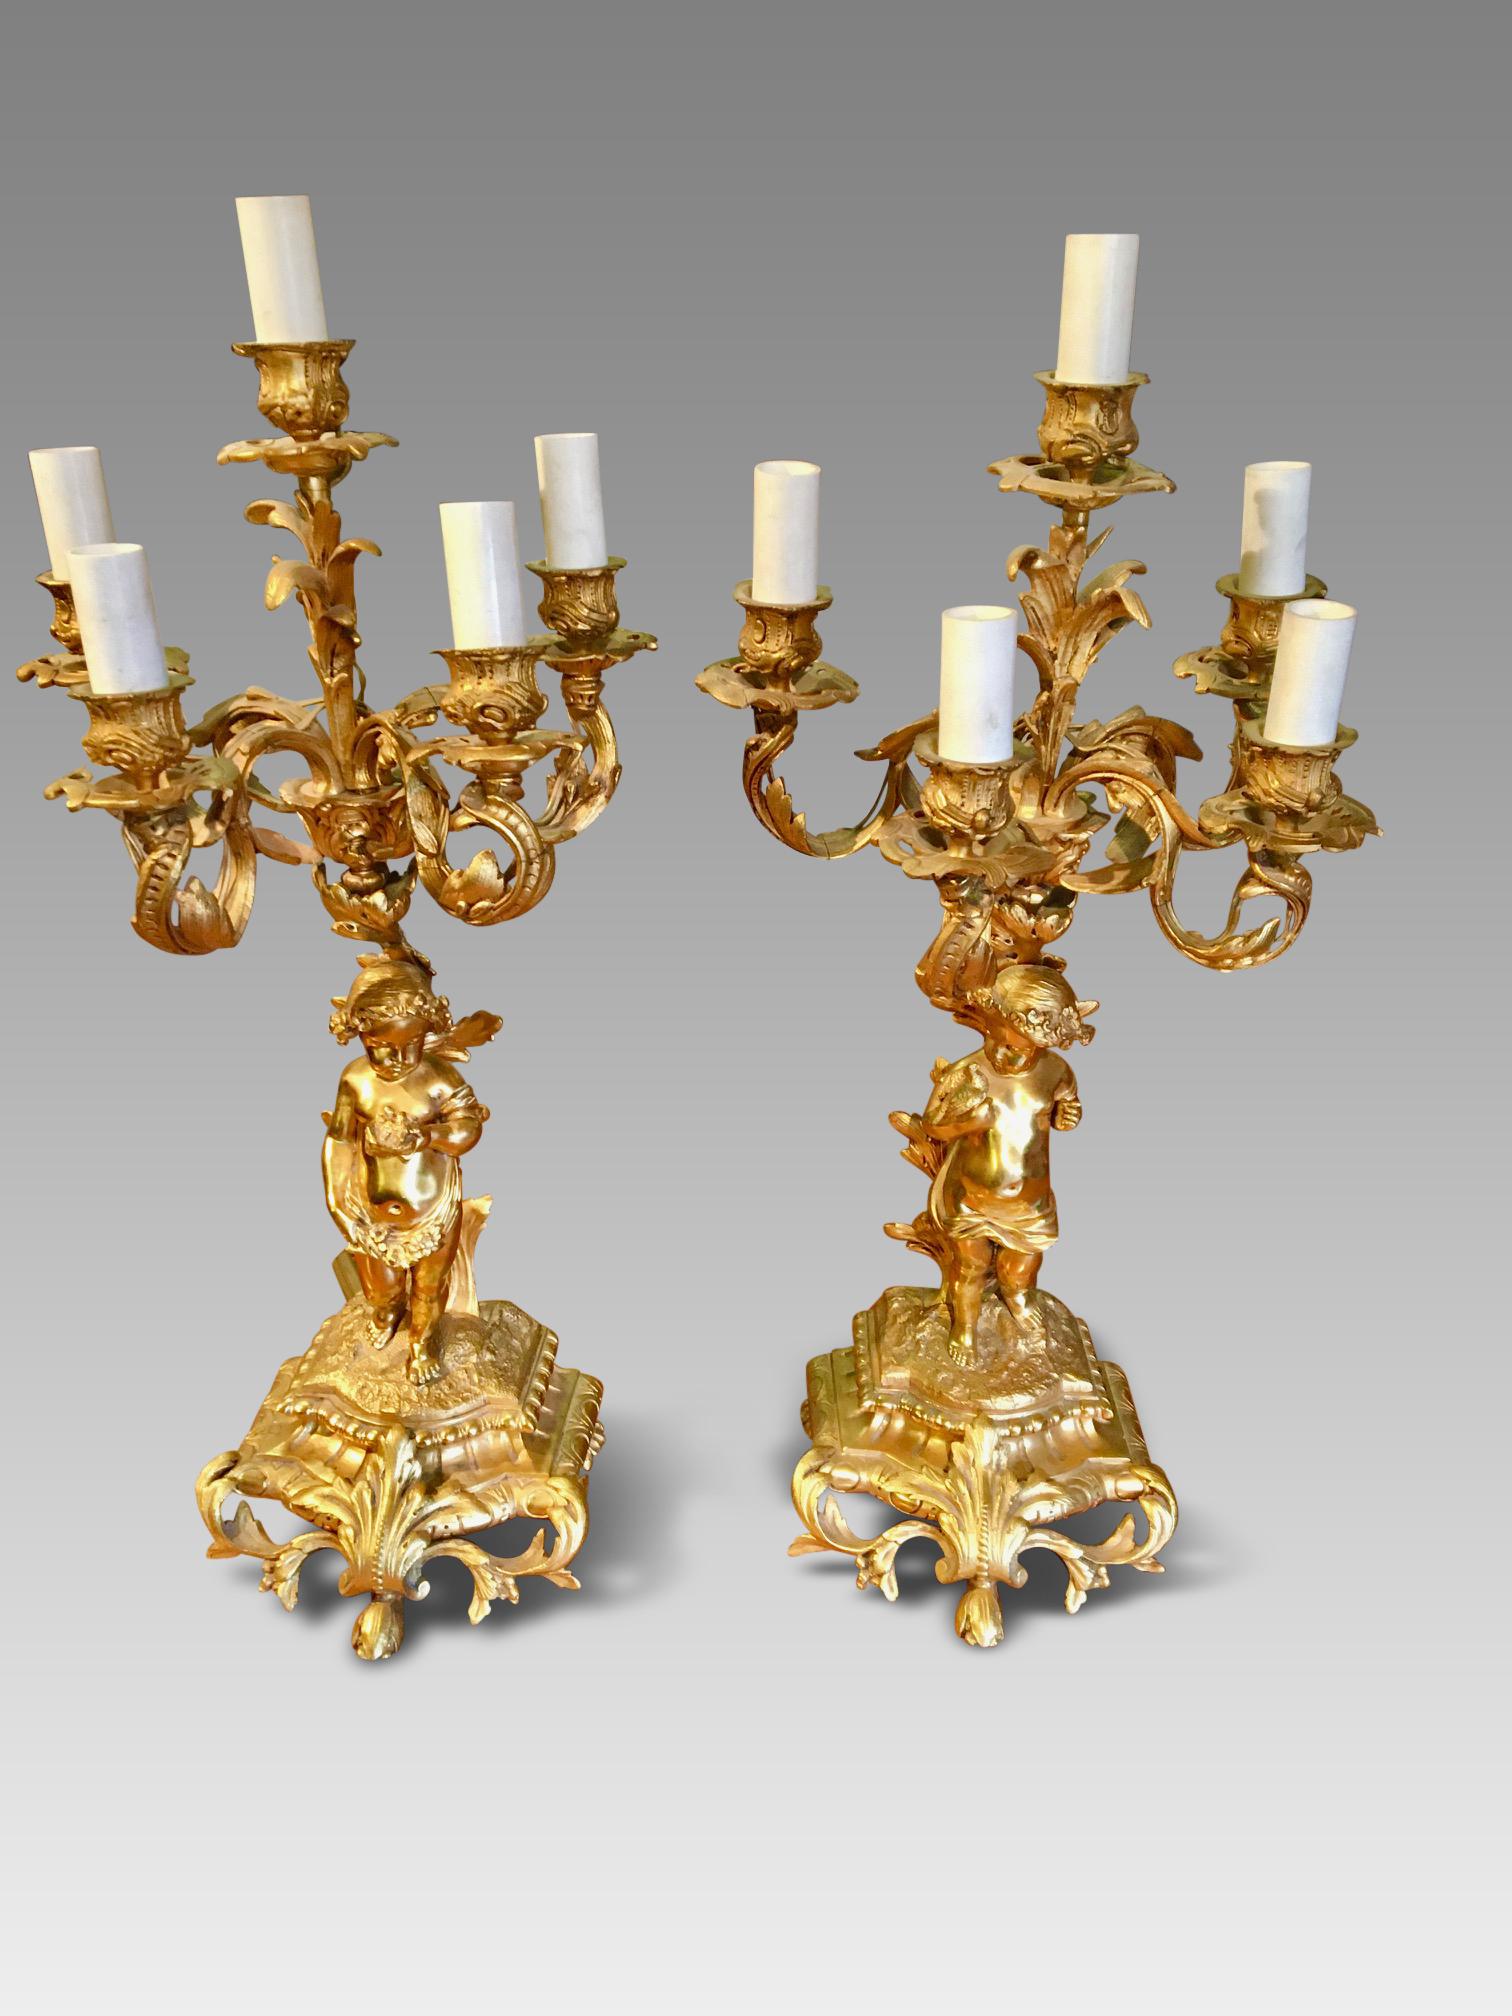 Beautiful gilded pair of candelabra in excellent condition. English, circa 1930s.
These delightful candelabra are an attractive and imposing size, standing 20 ins high with a circumference of 10 ins. The design and craftsmanship is superb with both